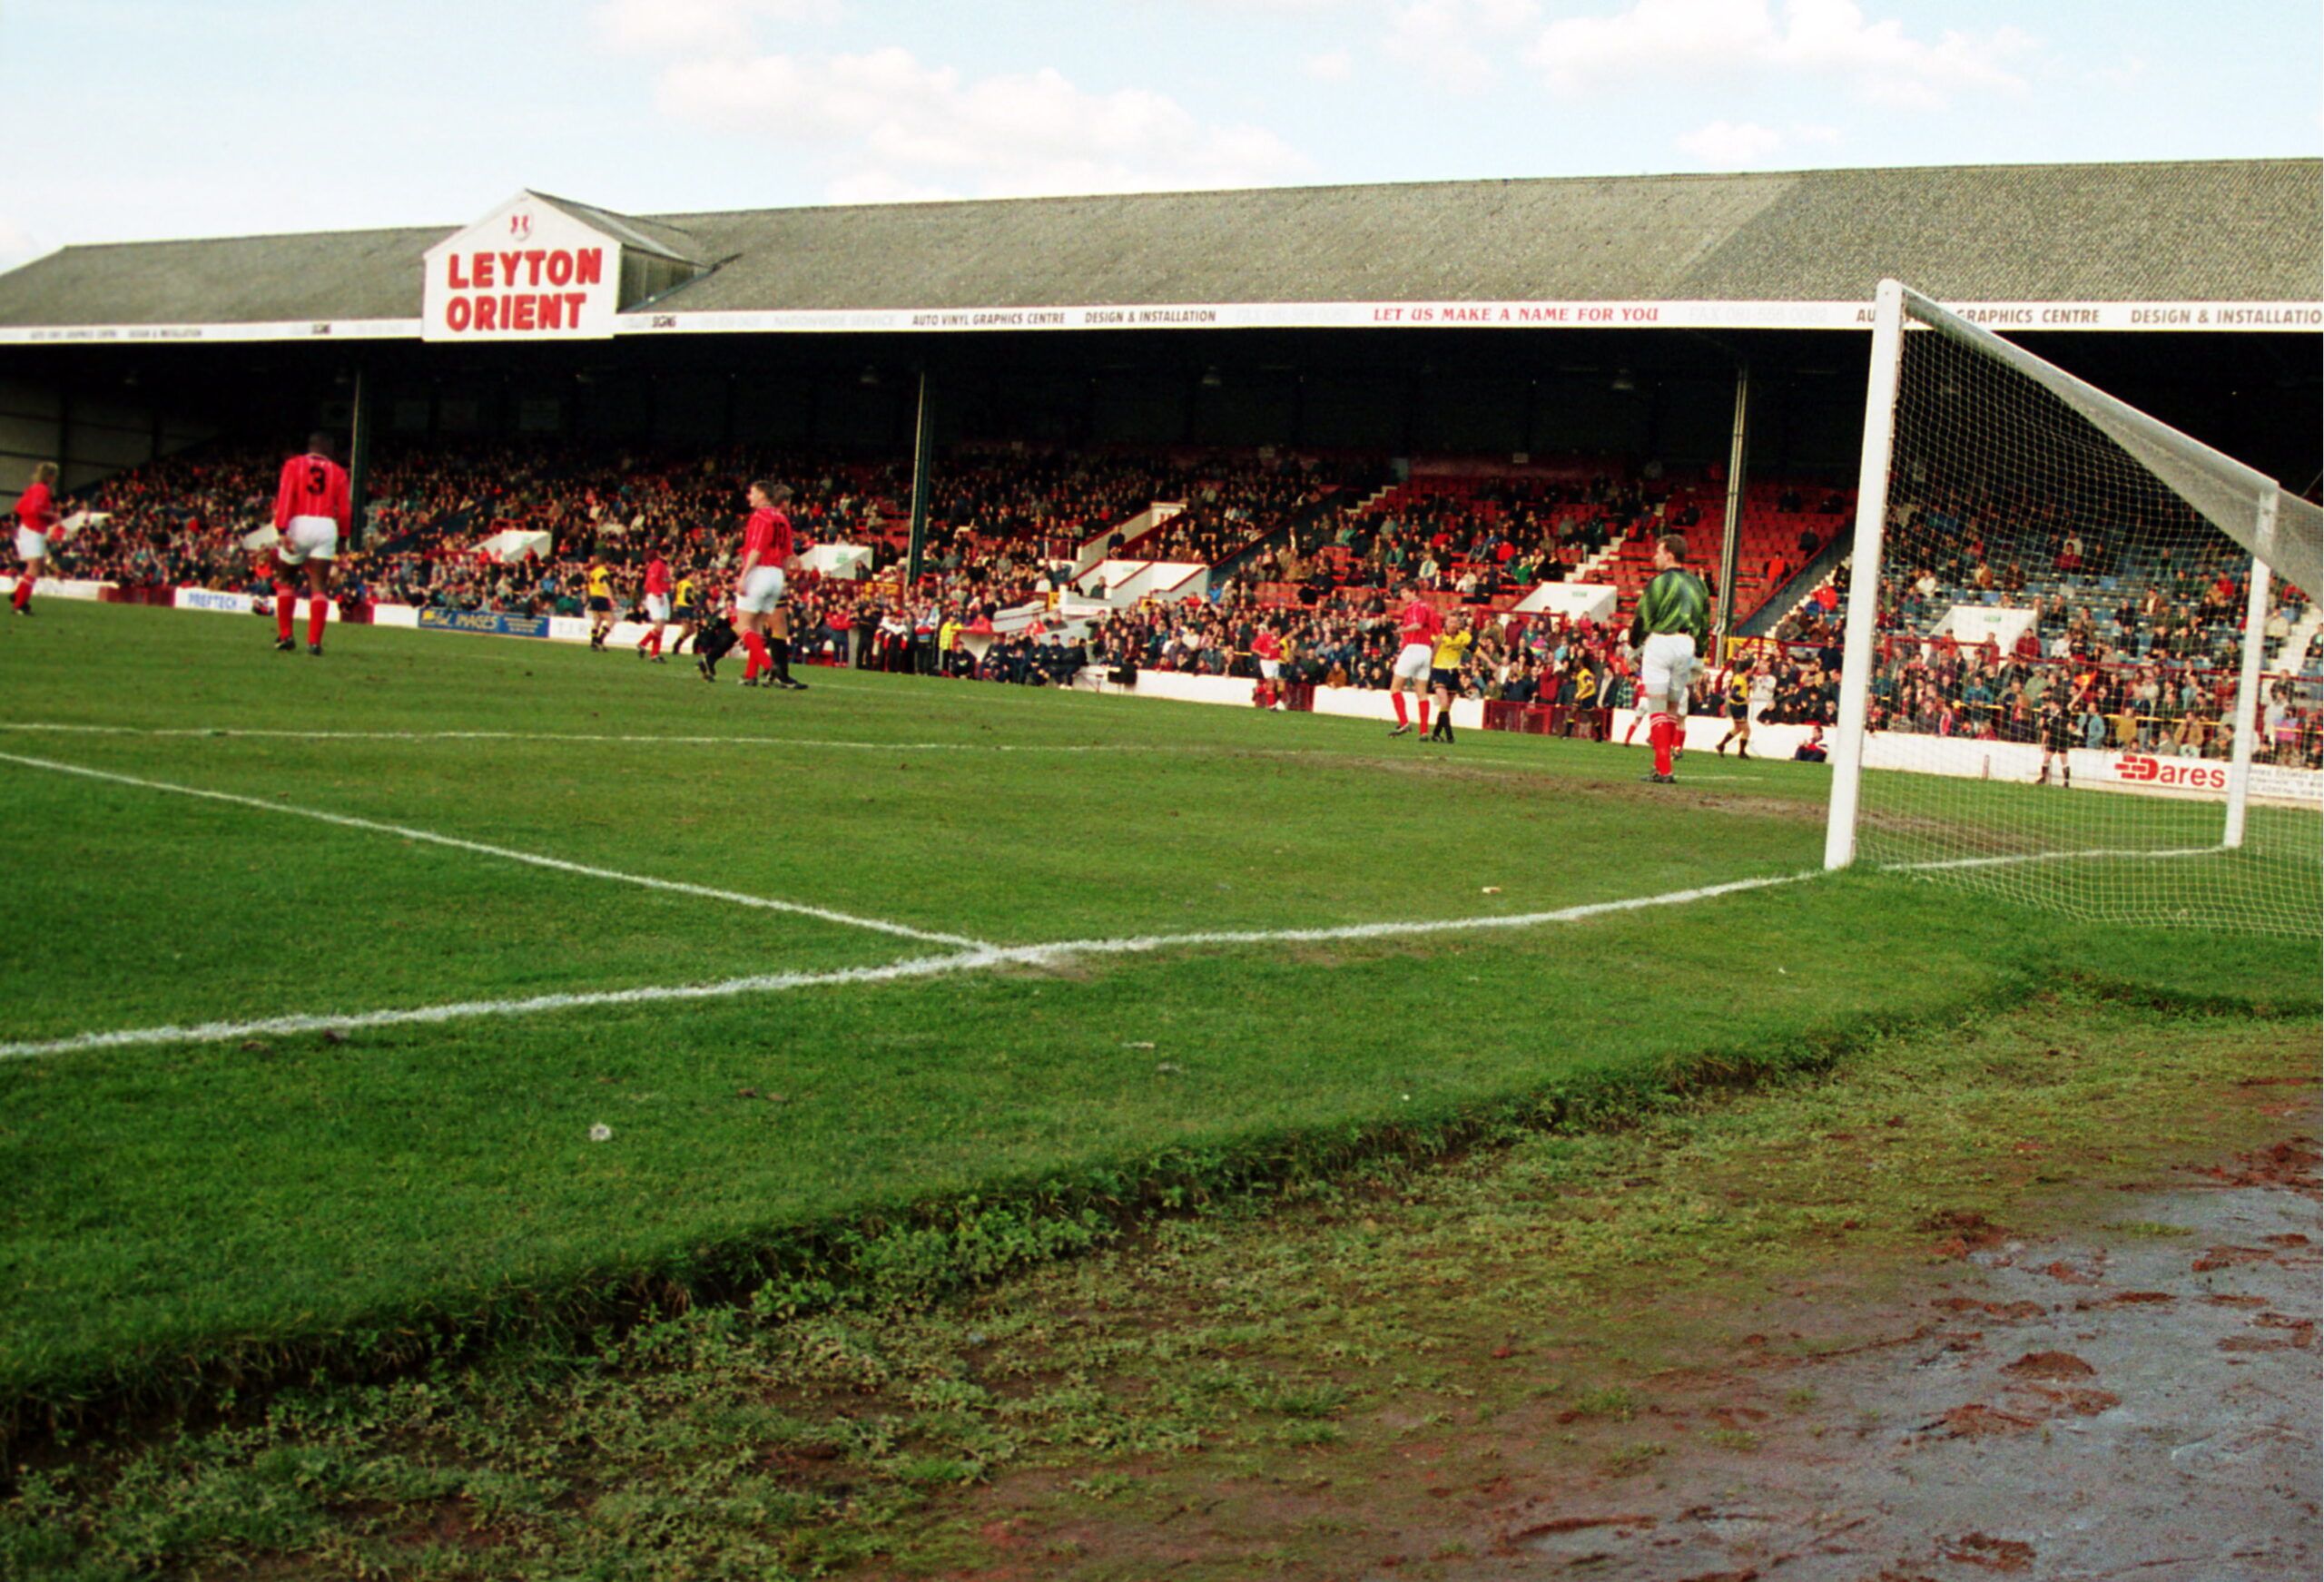 Football - Leyton Orient - 1995 
General view of Brisbane Road home of Leyton Orient 
Mandatory Credit: Action Images